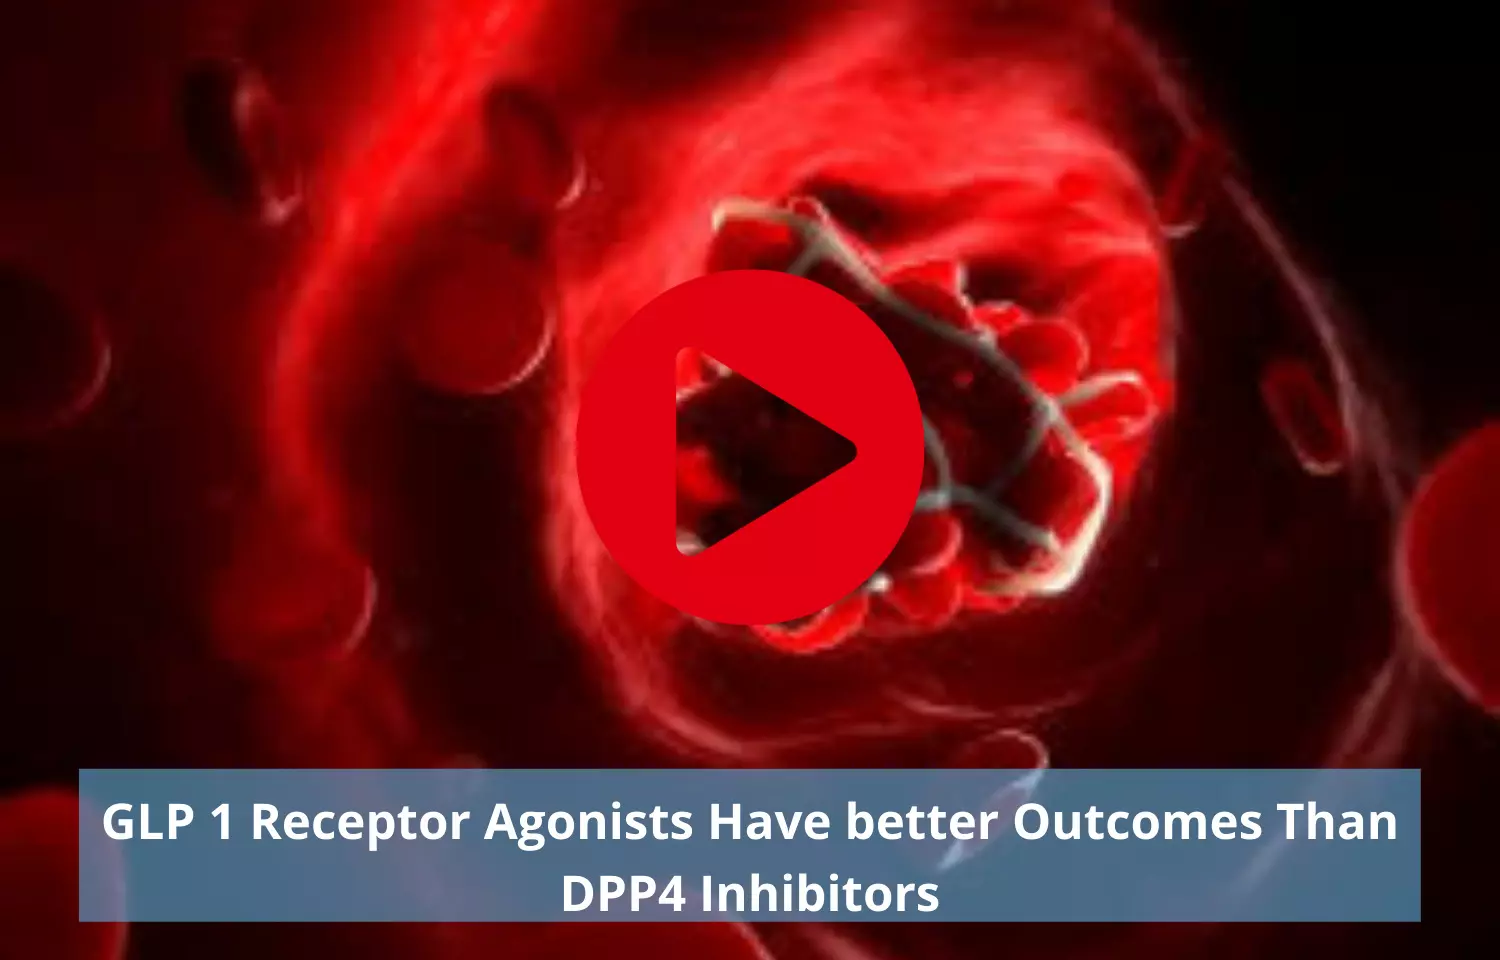 GLP 1 Receptor Agonists to have better outcomes Than DPP4 Inhibitors